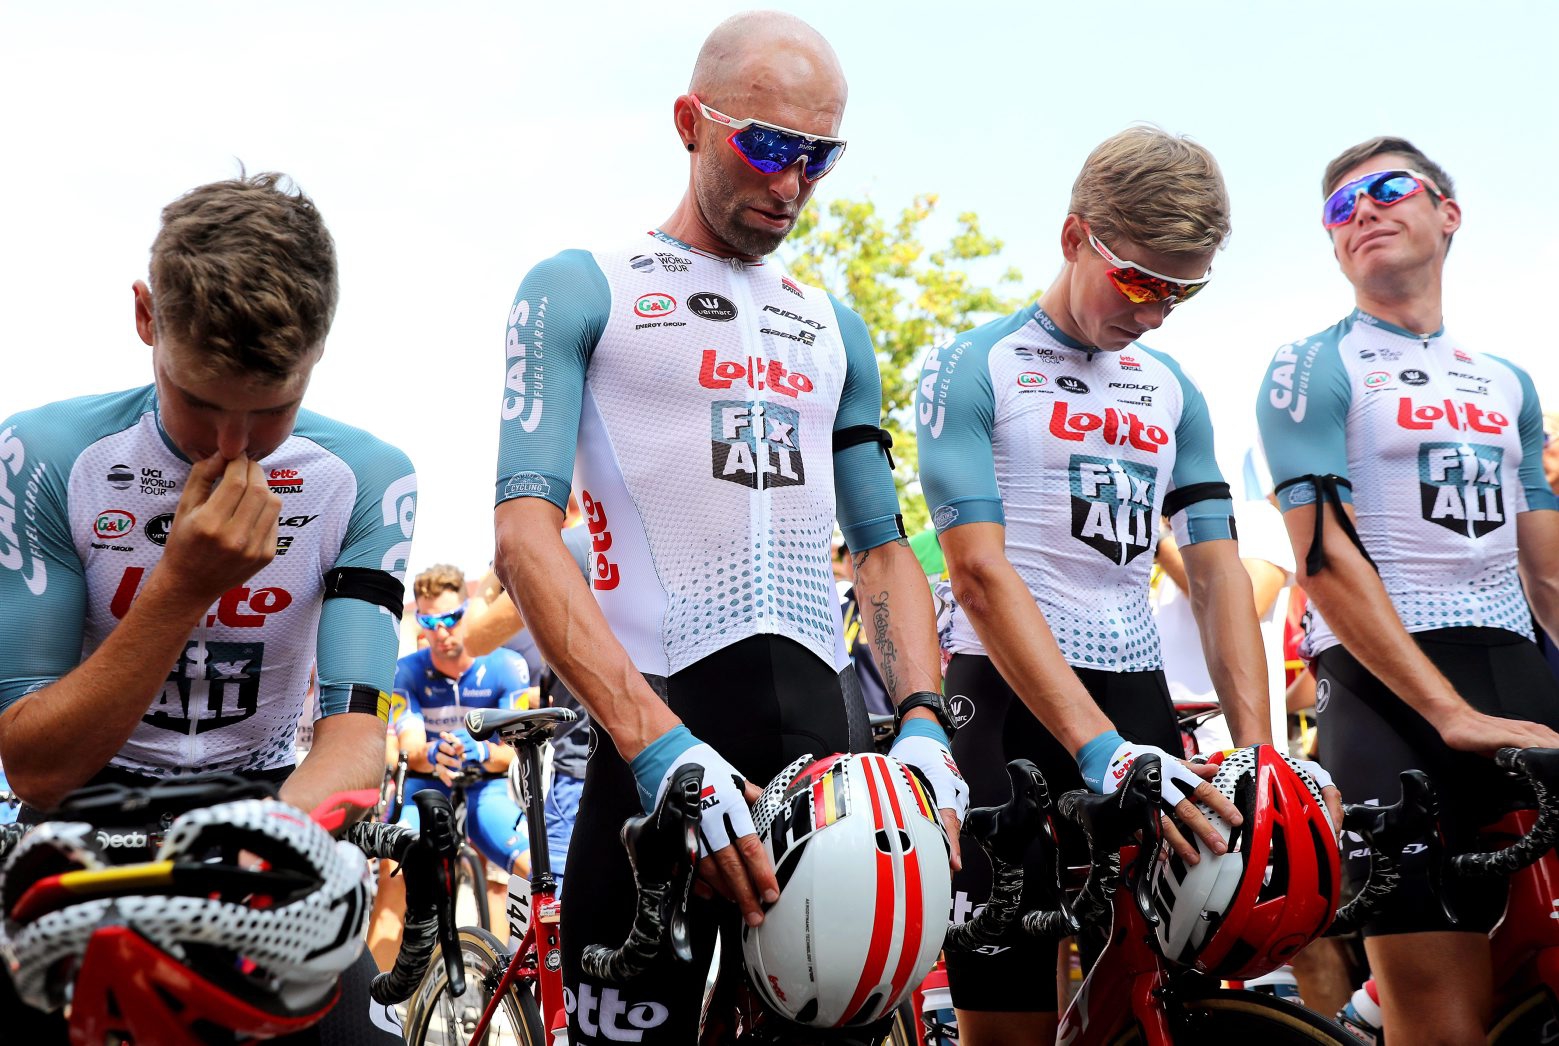 epa07758838 Riders of the Lotto Soudal team hold a minute of silence for their Belgian teammate Bjorg Lambrecht at the start of the fourth stage of the Tour de Pologne cycling race over 133.7km from Jaworzno to Kocierz, Poland, 06 August 2019. Bjorg Lambrecht, aged 22, of the Lotto Soudal team, crashed into a concrete culvert on the road during the third stage of the race. He was resuscitated and taken to hospital in Rybnik, where he died of his injuries. The organisers shortened the fourth stage by a 38.5km loop around Kocierz. The stage was also neutralized to pay respects to Lambrecht.  EPA/ANDRZEJ GRYGIEL POLAND OUT POLAND CYCLING TOUR DE POLOGNE